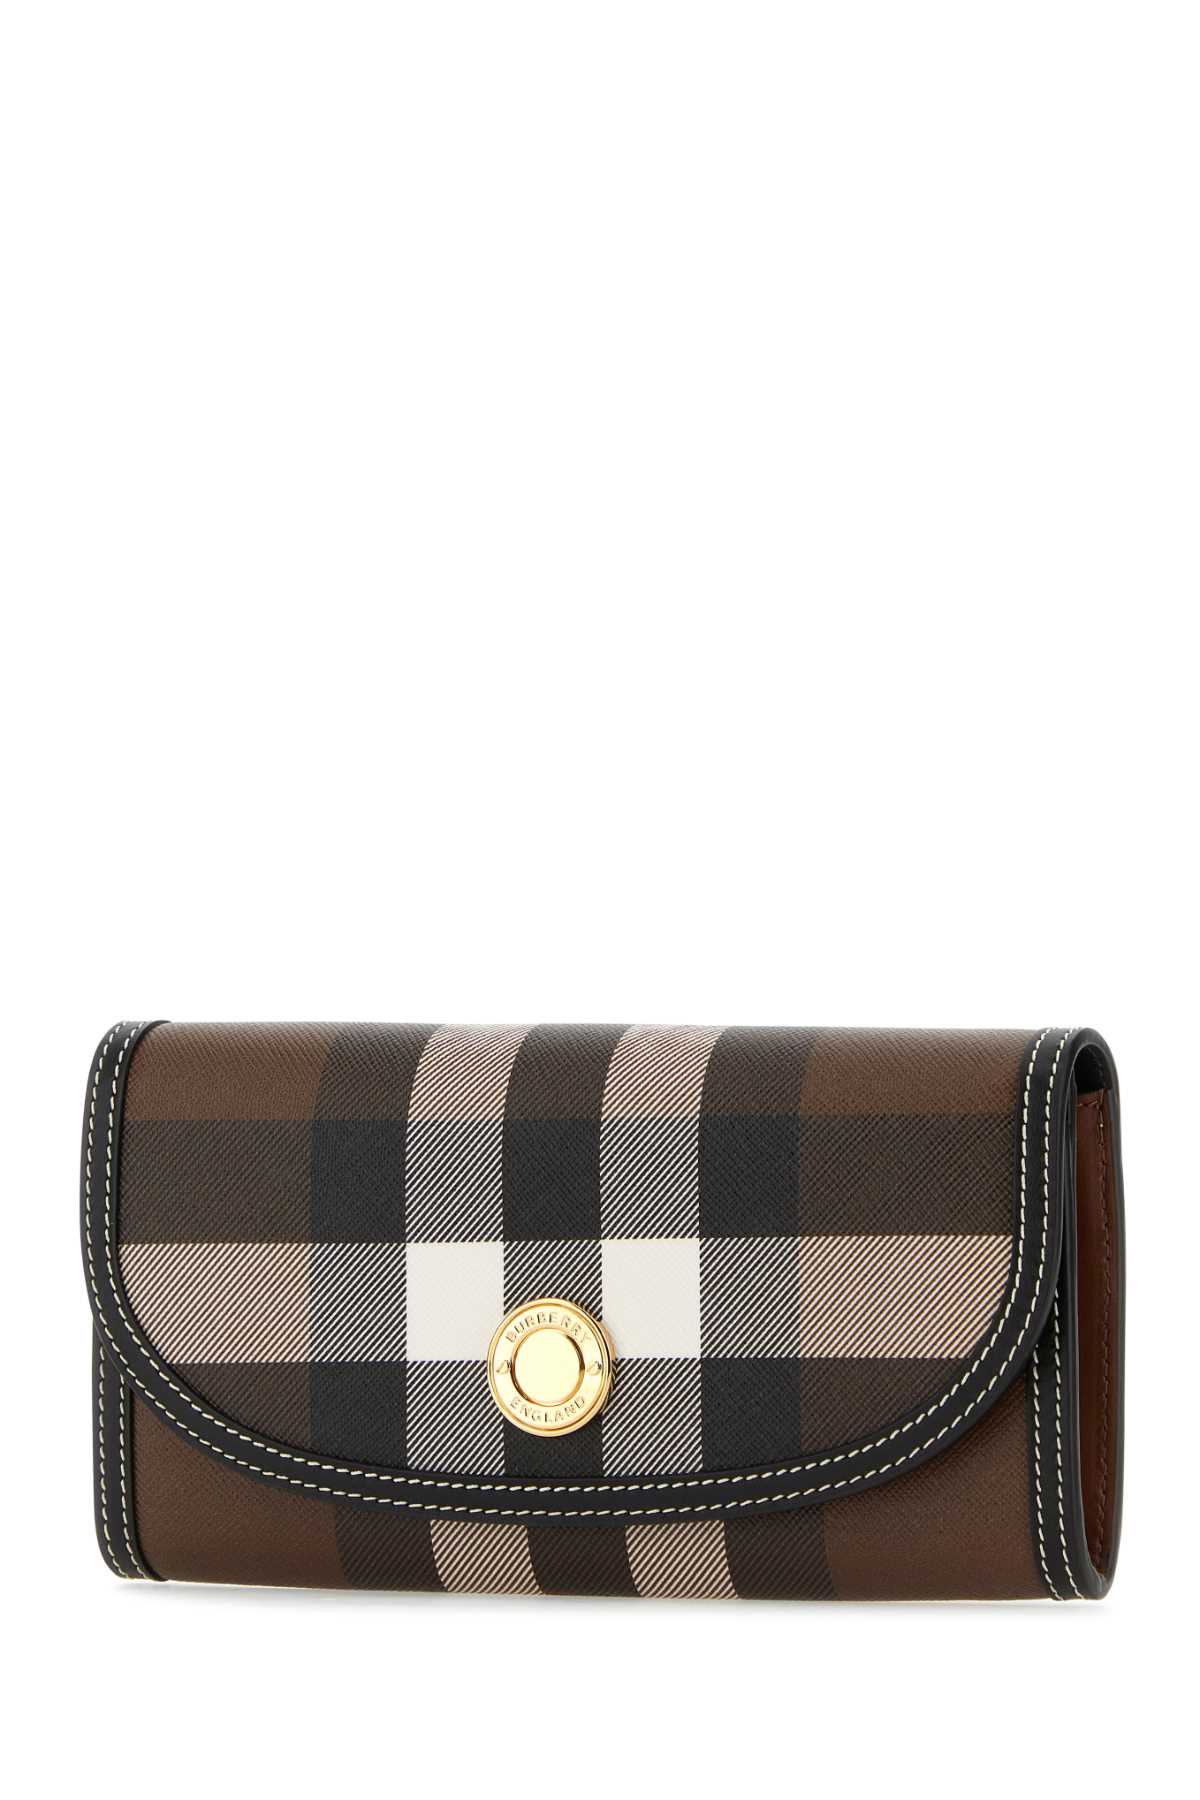 Shop Burberry Printed Canvas And Leather Wallet In Darkbirchbrown